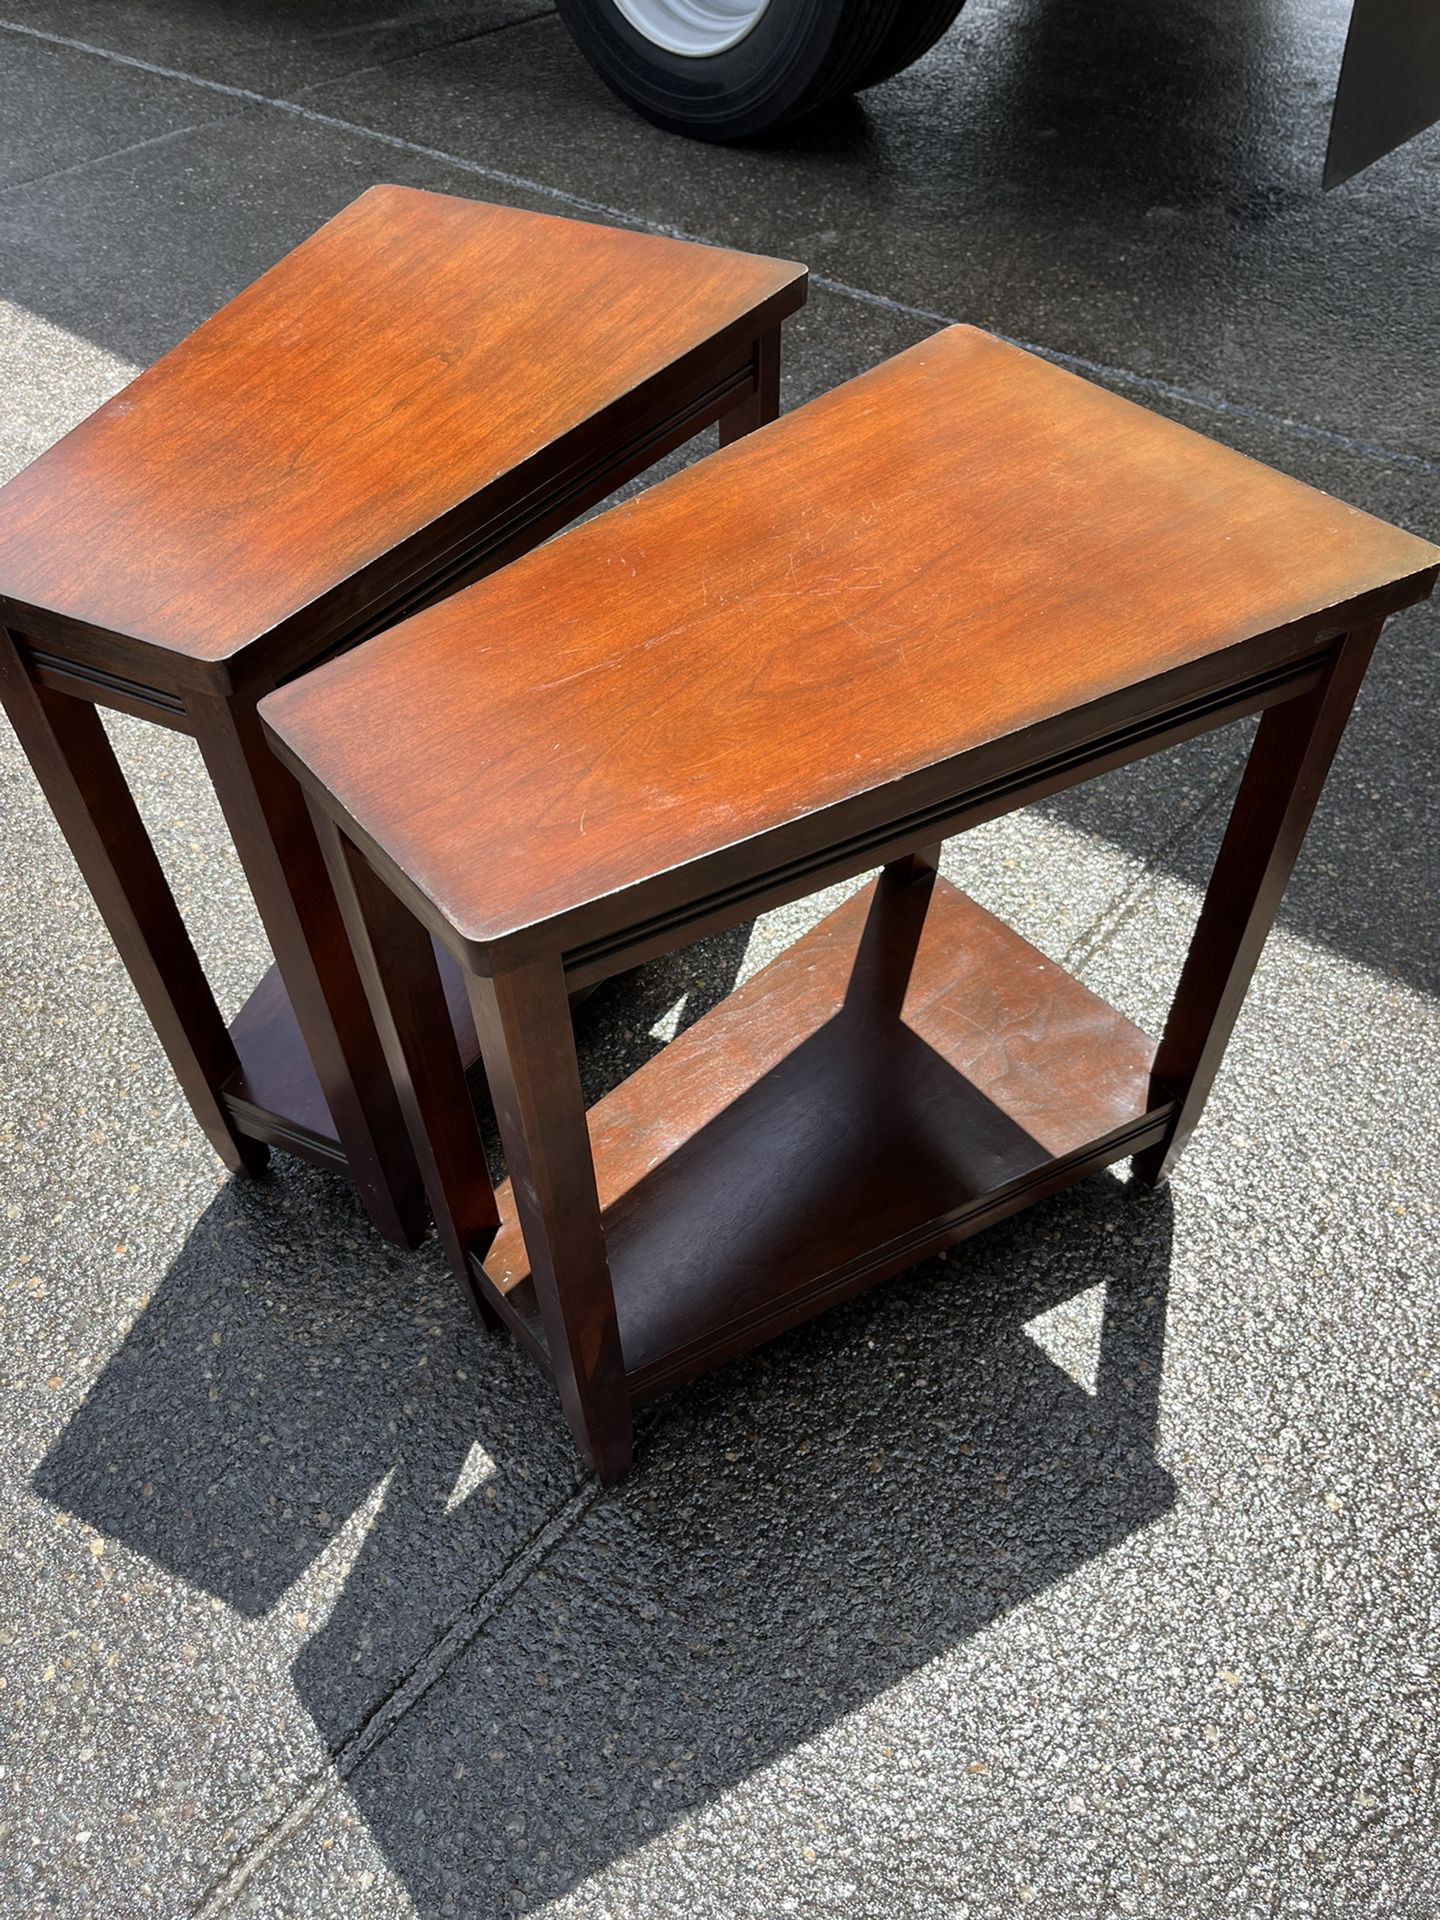 Wedge End Tables